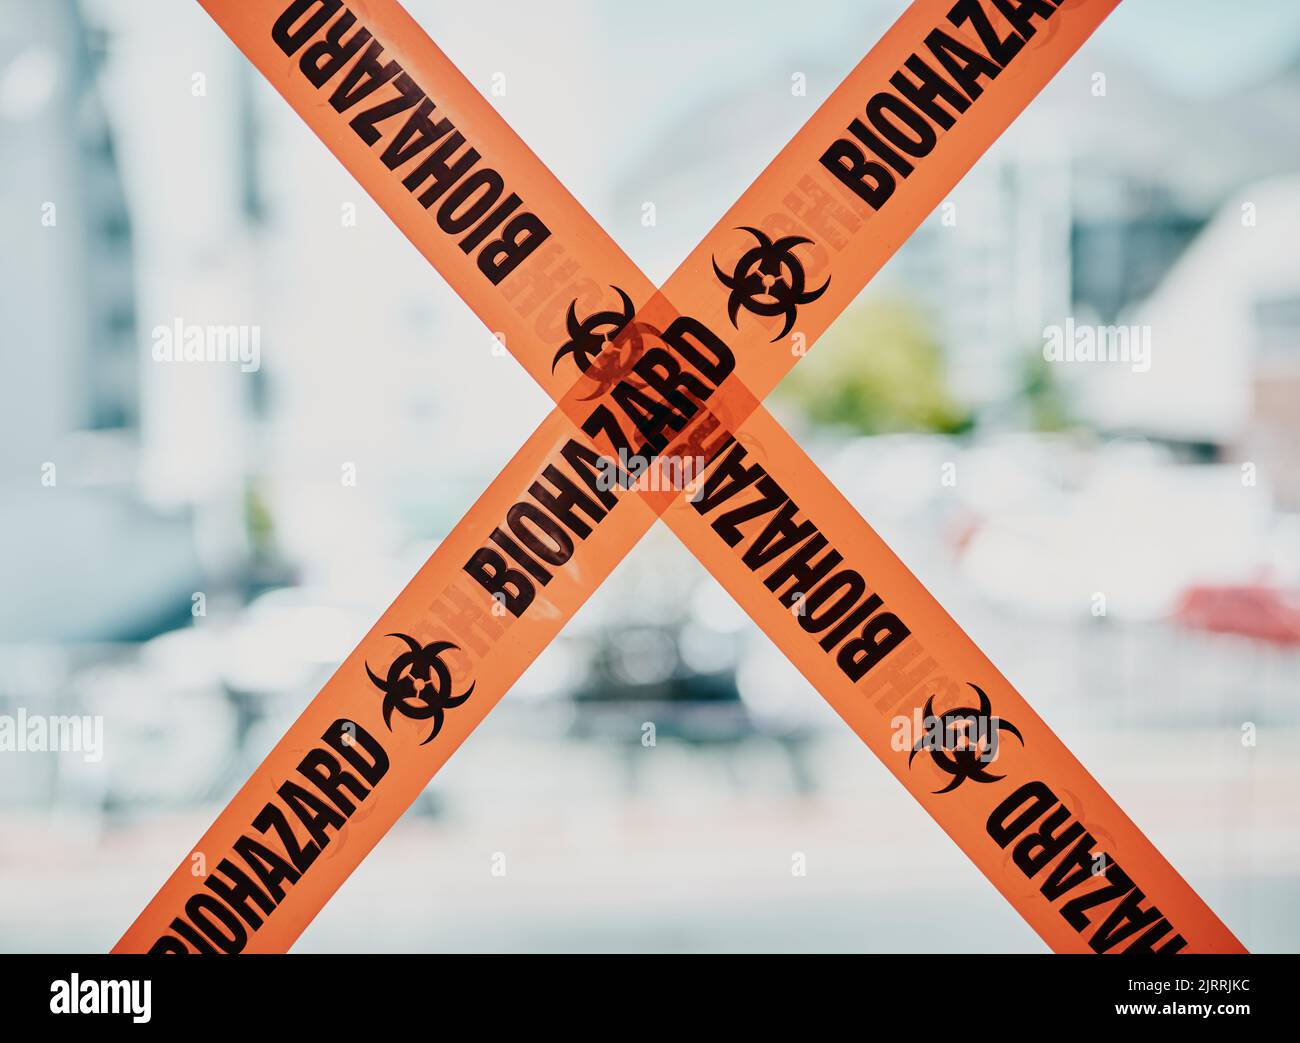 Biohazard caution, danger barrier tape of a quarantine zone. Bright orange safety stripes across infected area, no entry or cross, room closed down Stock Photo